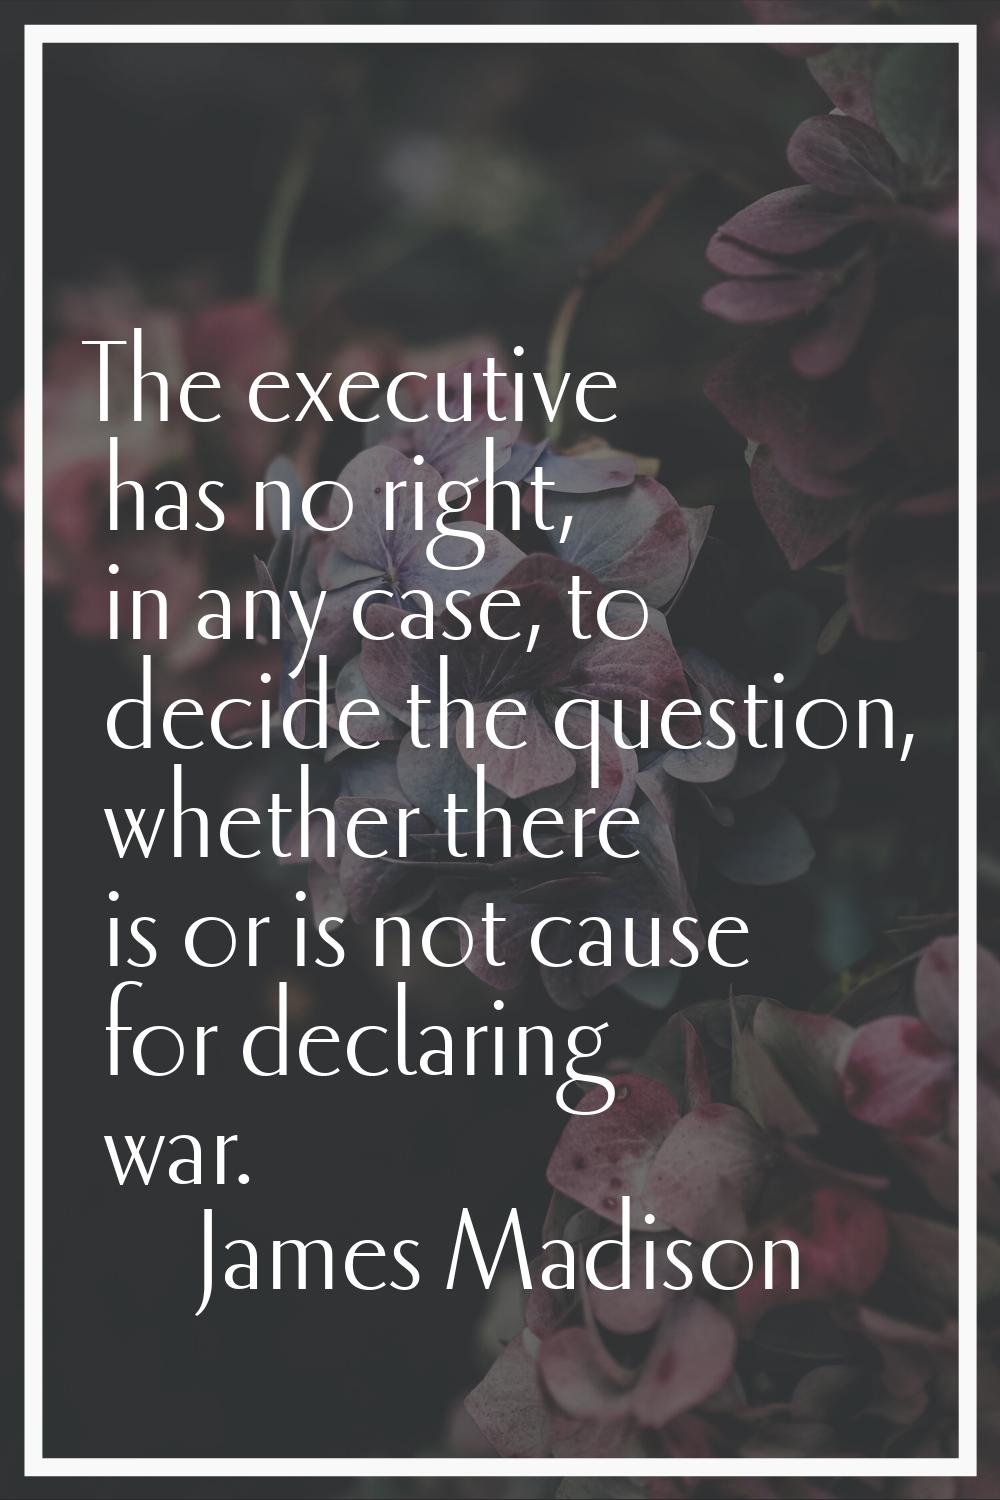 The executive has no right, in any case, to decide the question, whether there is or is not cause f